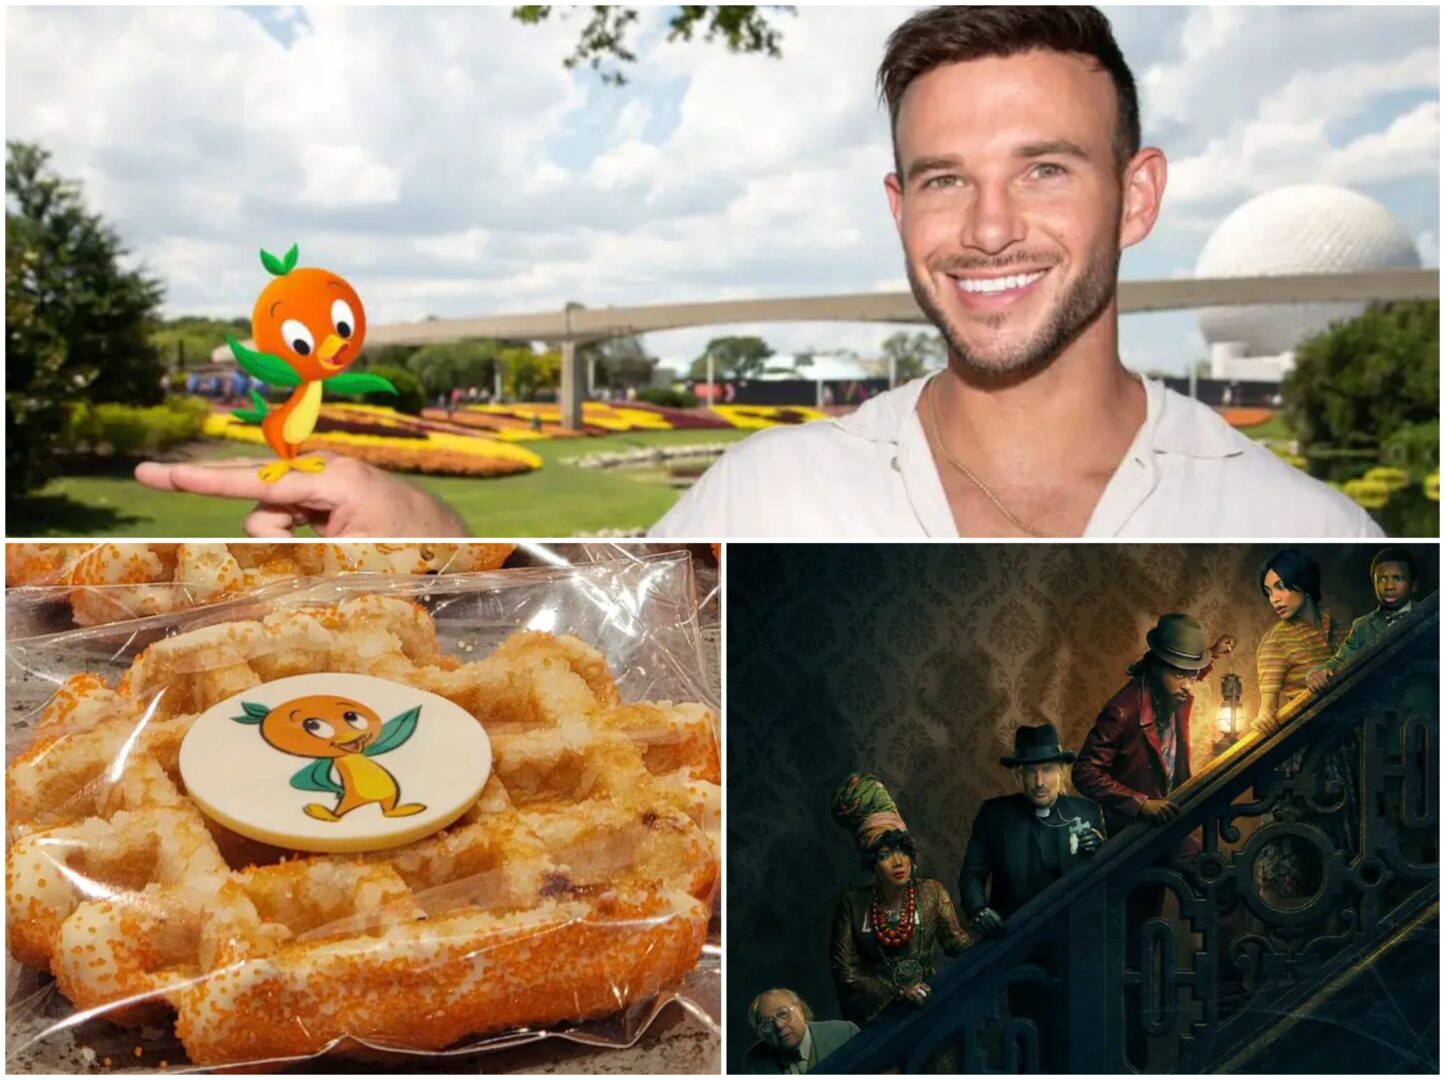 Disney News Highlights: Prices Raised at Chef Mickey’s, New Disney Haunted Mansion Trailer, DVC Tower at Polynesian Goes Vertical